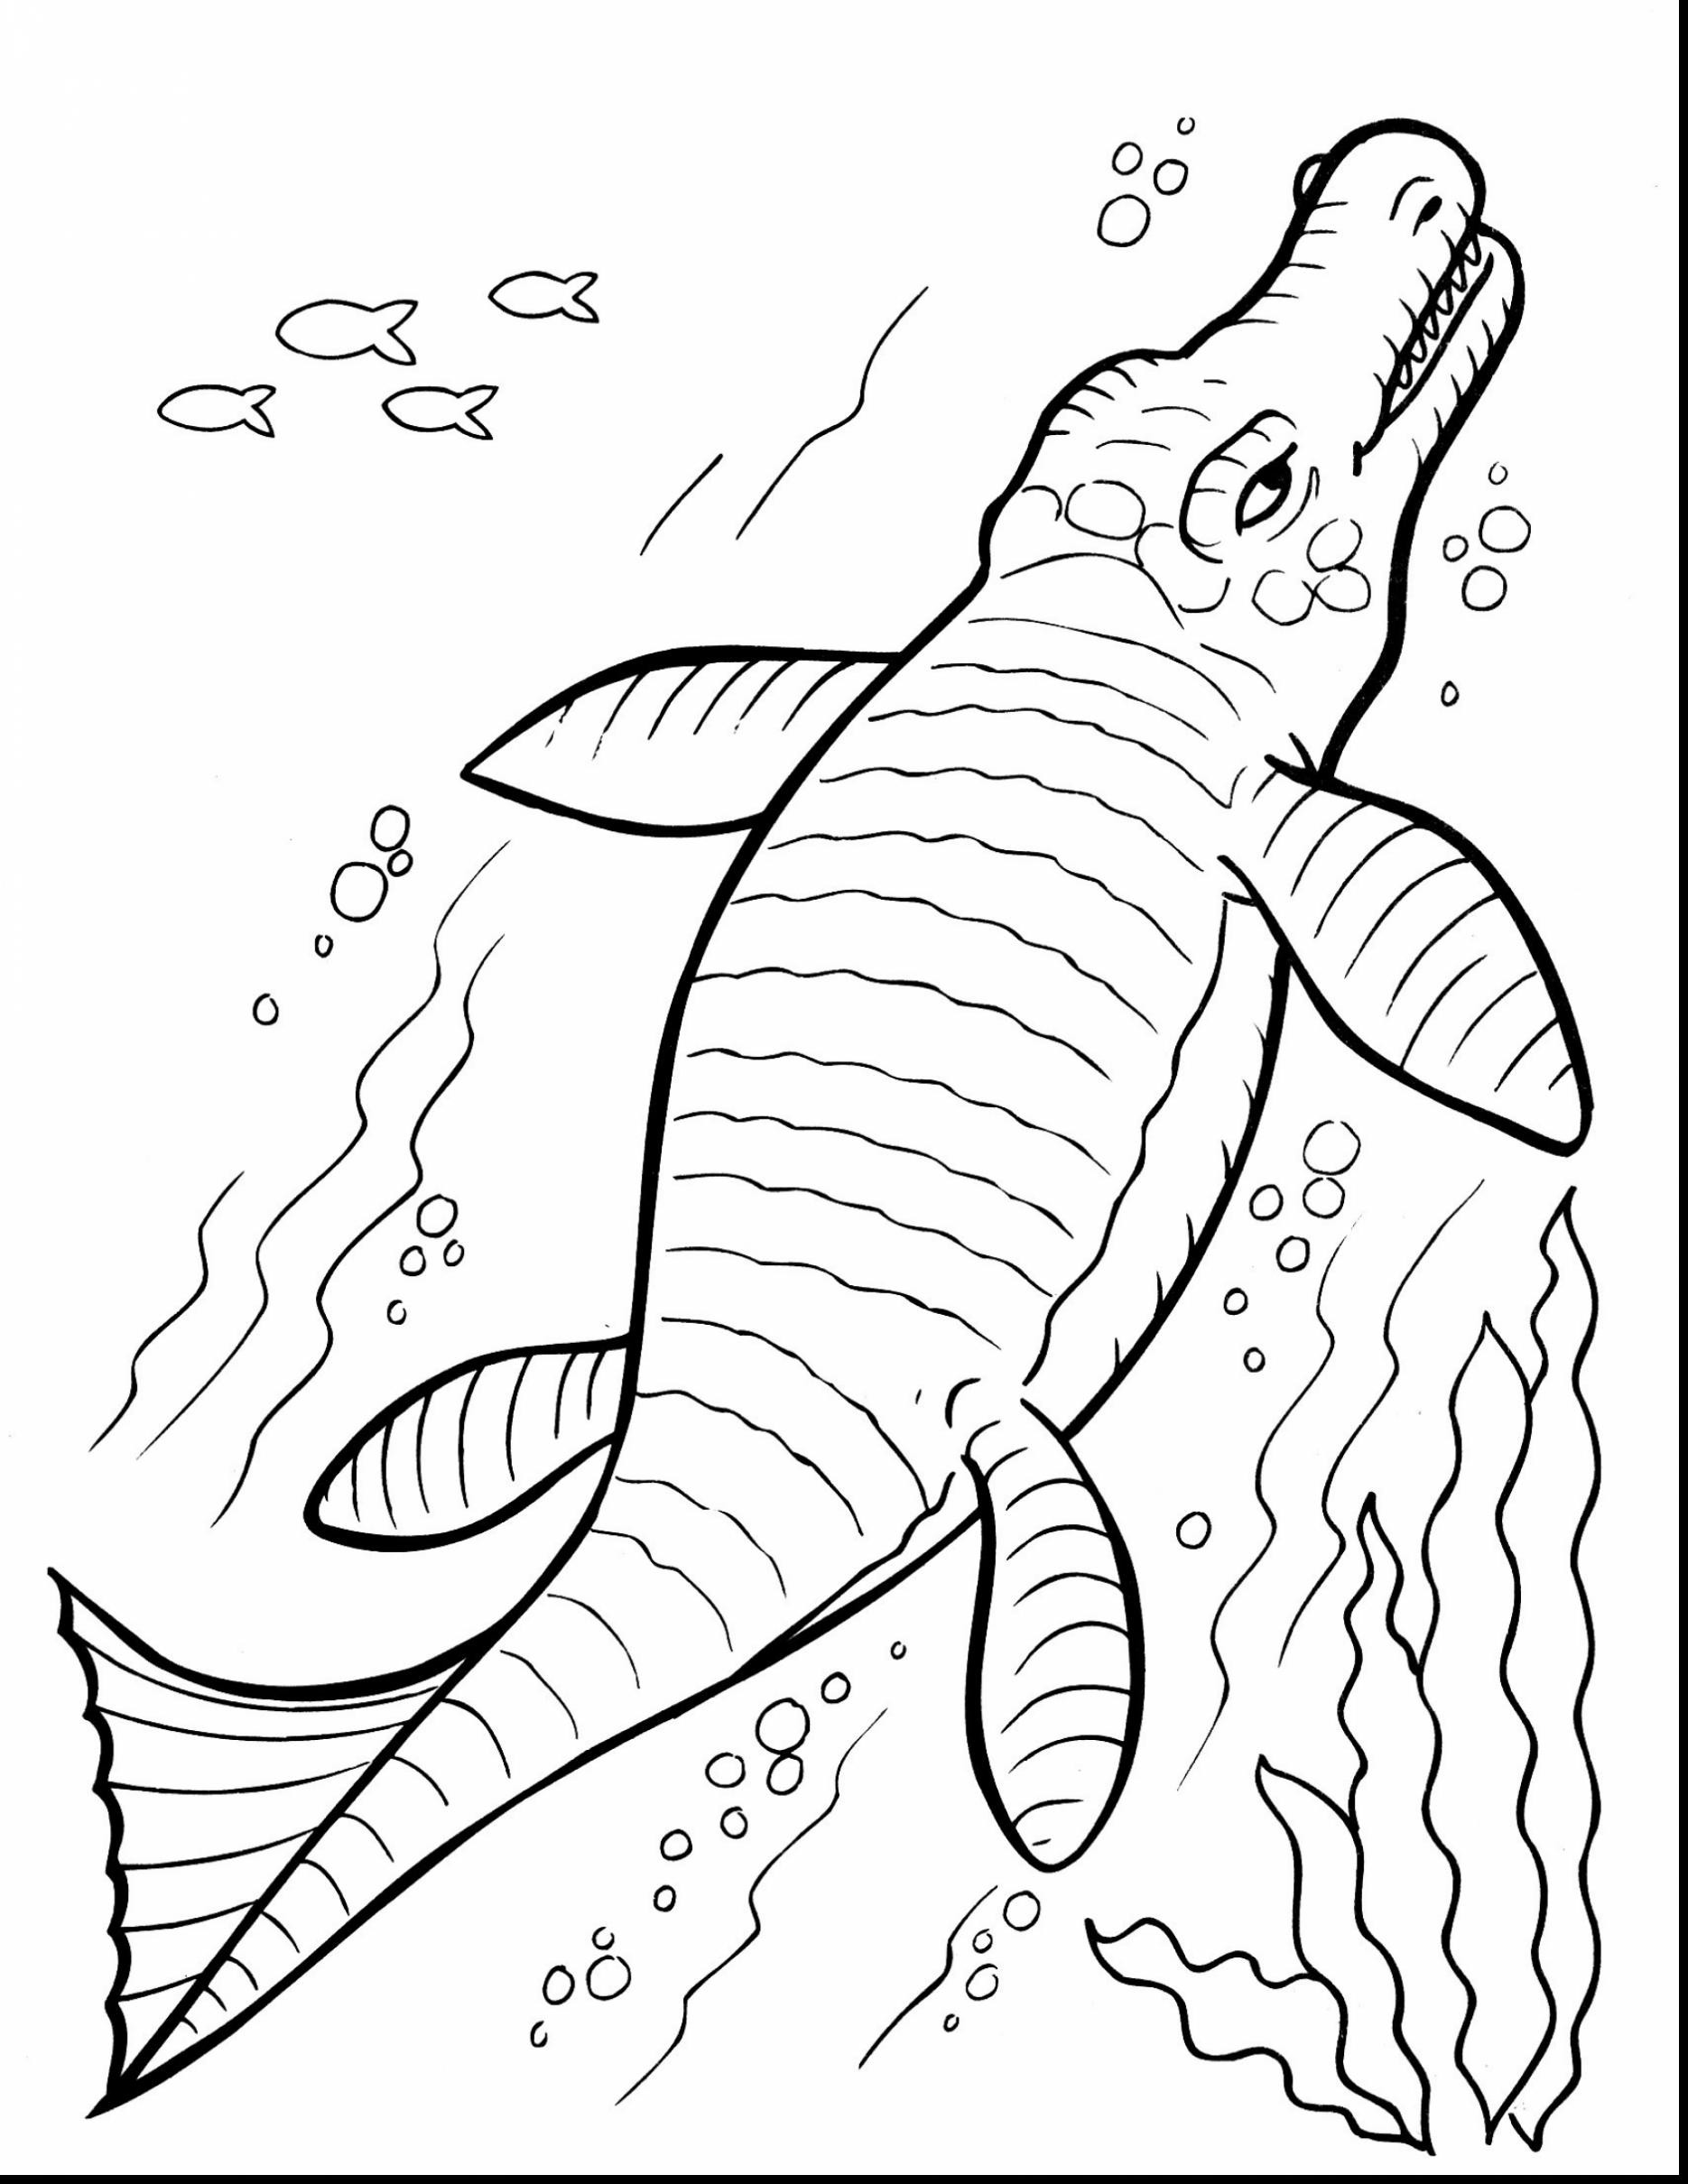 Long Neck Dinosaurs Coloring Page Wallpaper